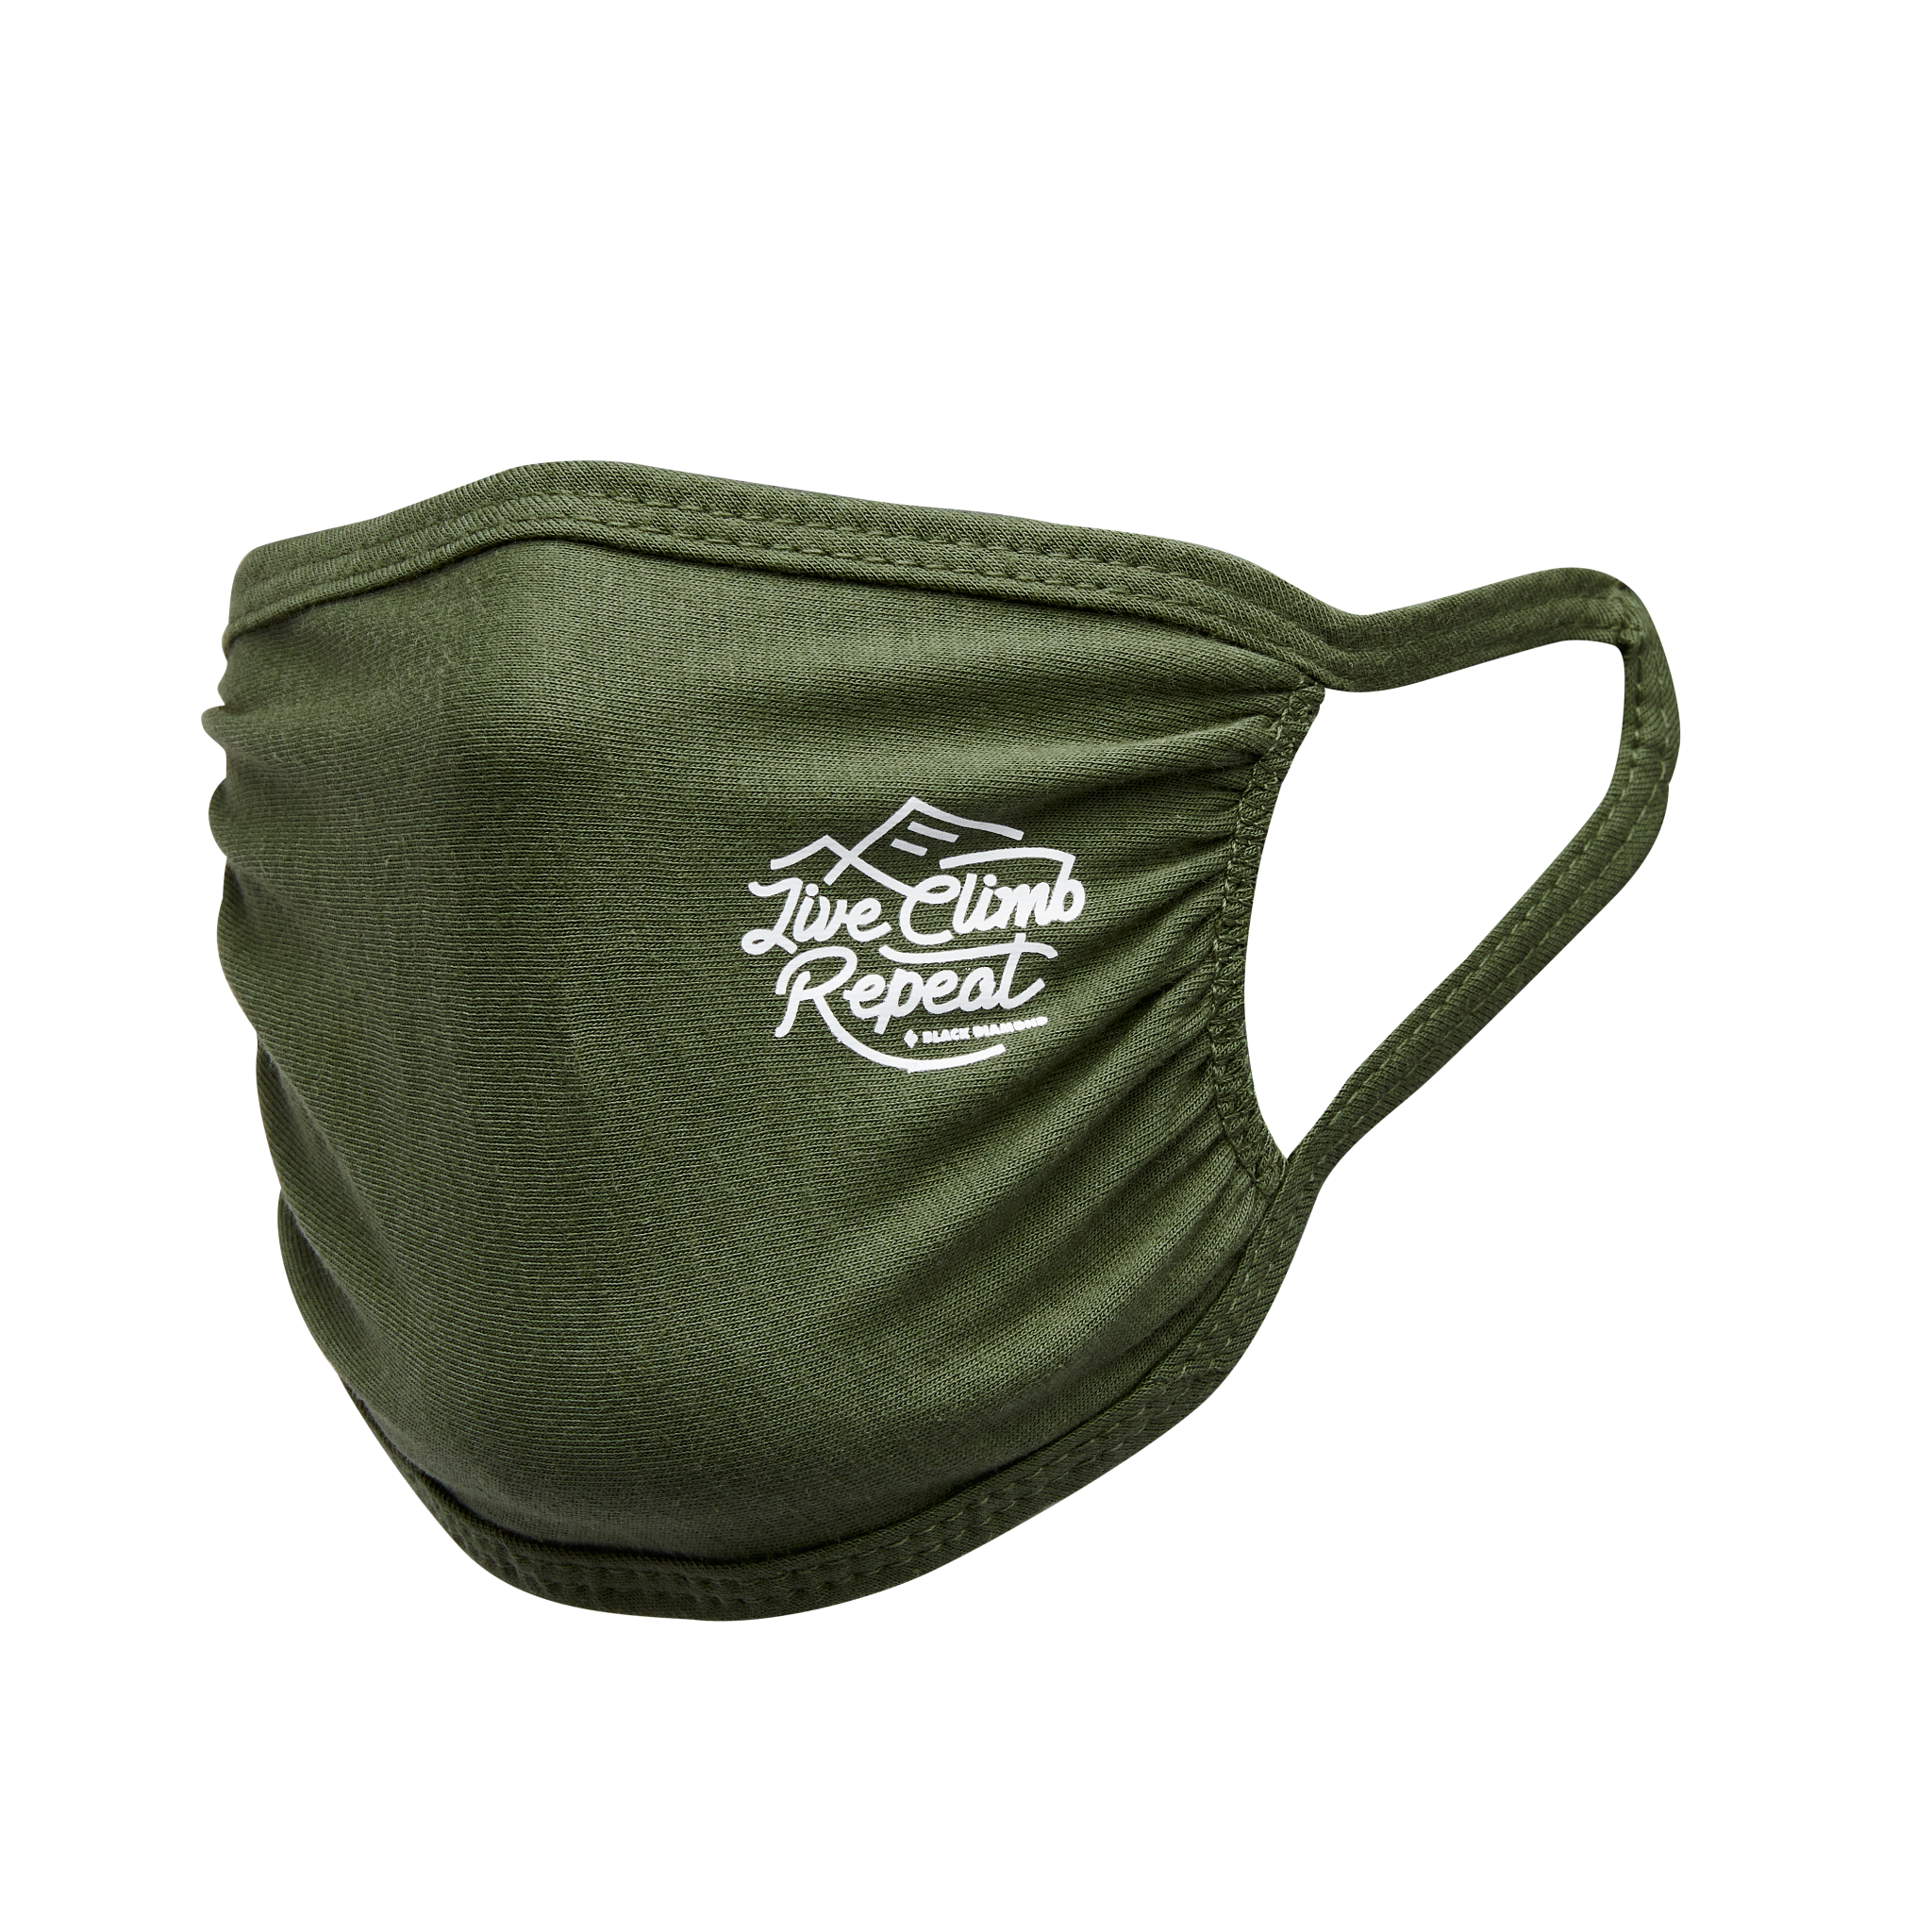 Black Diamond Equipment Live Climb Repeat Logo Facemask Top, in Army Green